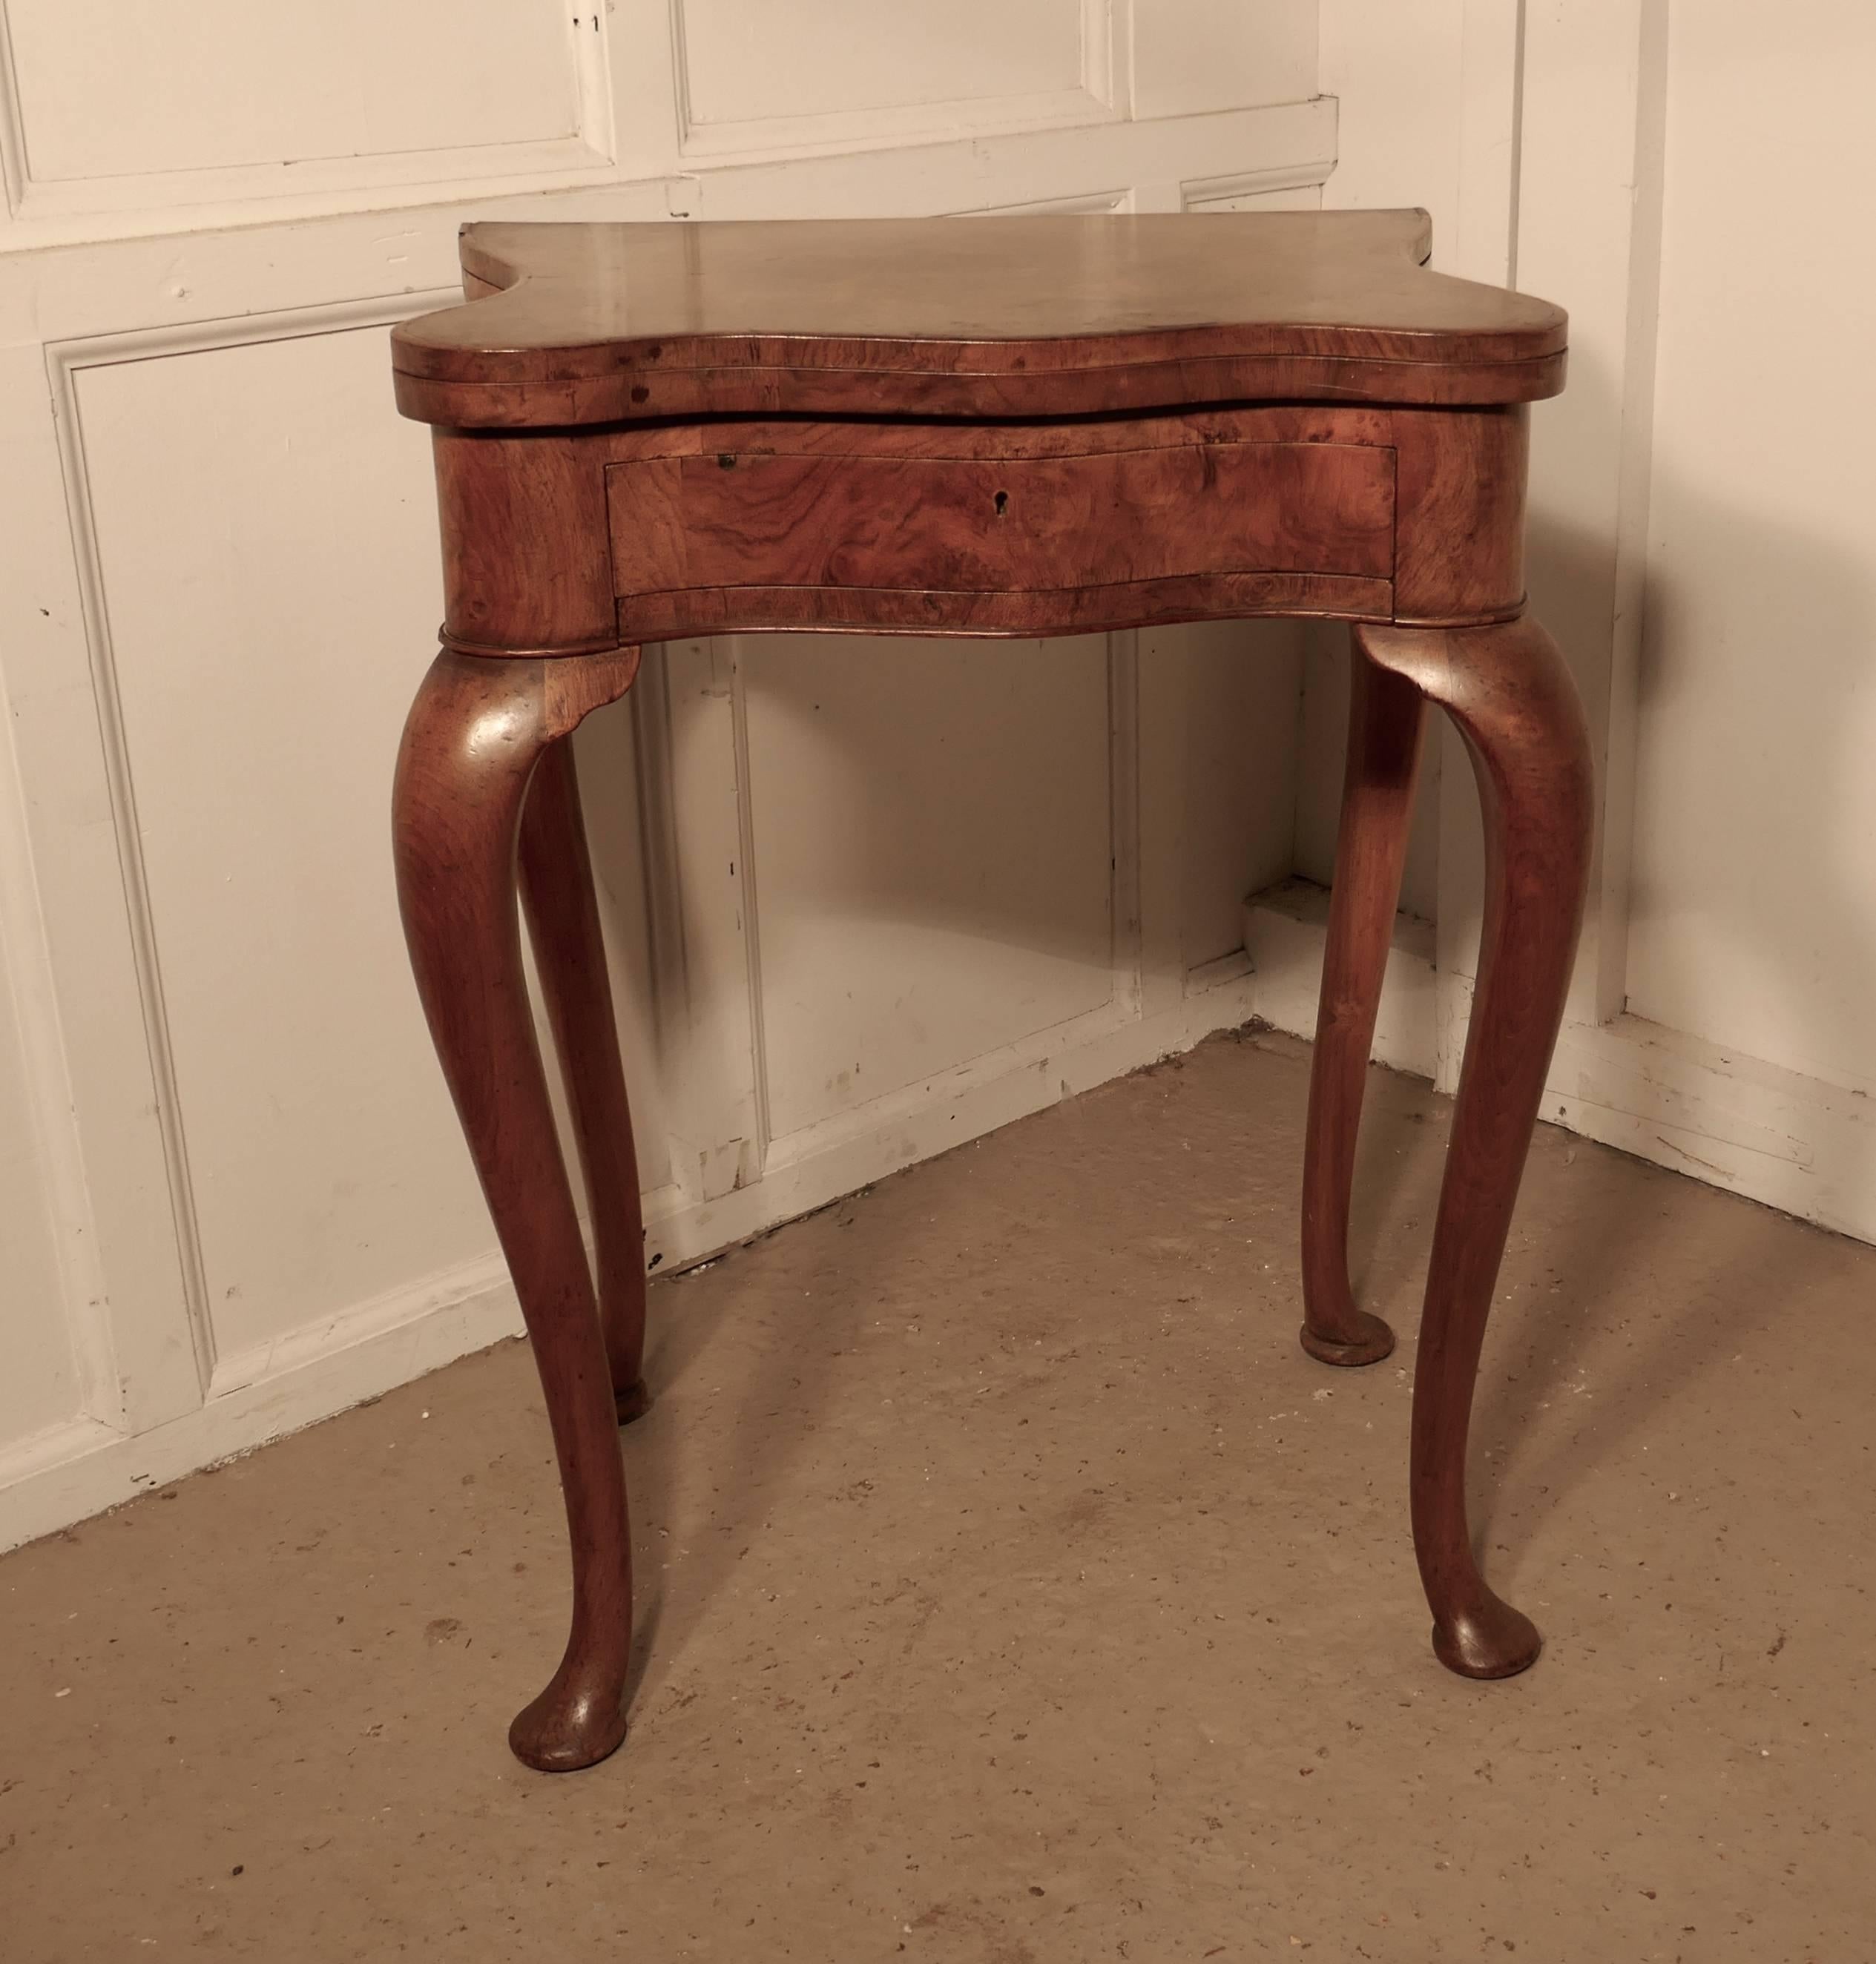 This is a charming piece, the table has an unusual scalloped shape, it stands on slender cabriole legs and has a drawer with a side beneath for holding game boards
The top is made in superbly matched burr walnut veneers, the tabletop folds out